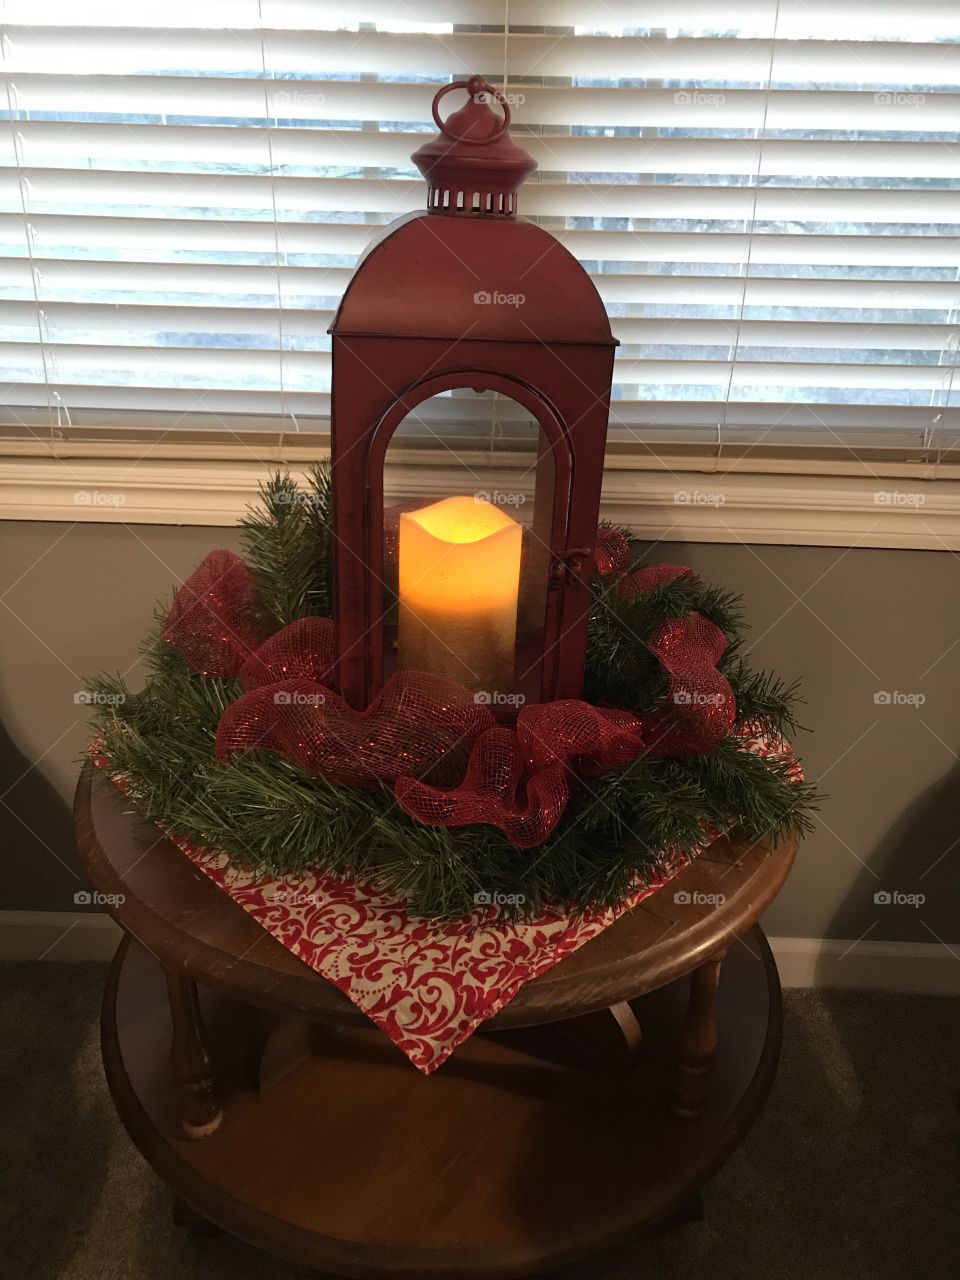 A red lantern holding a glowing candle set among some greenery and red ribbon creates a beautiful Christmas touch.